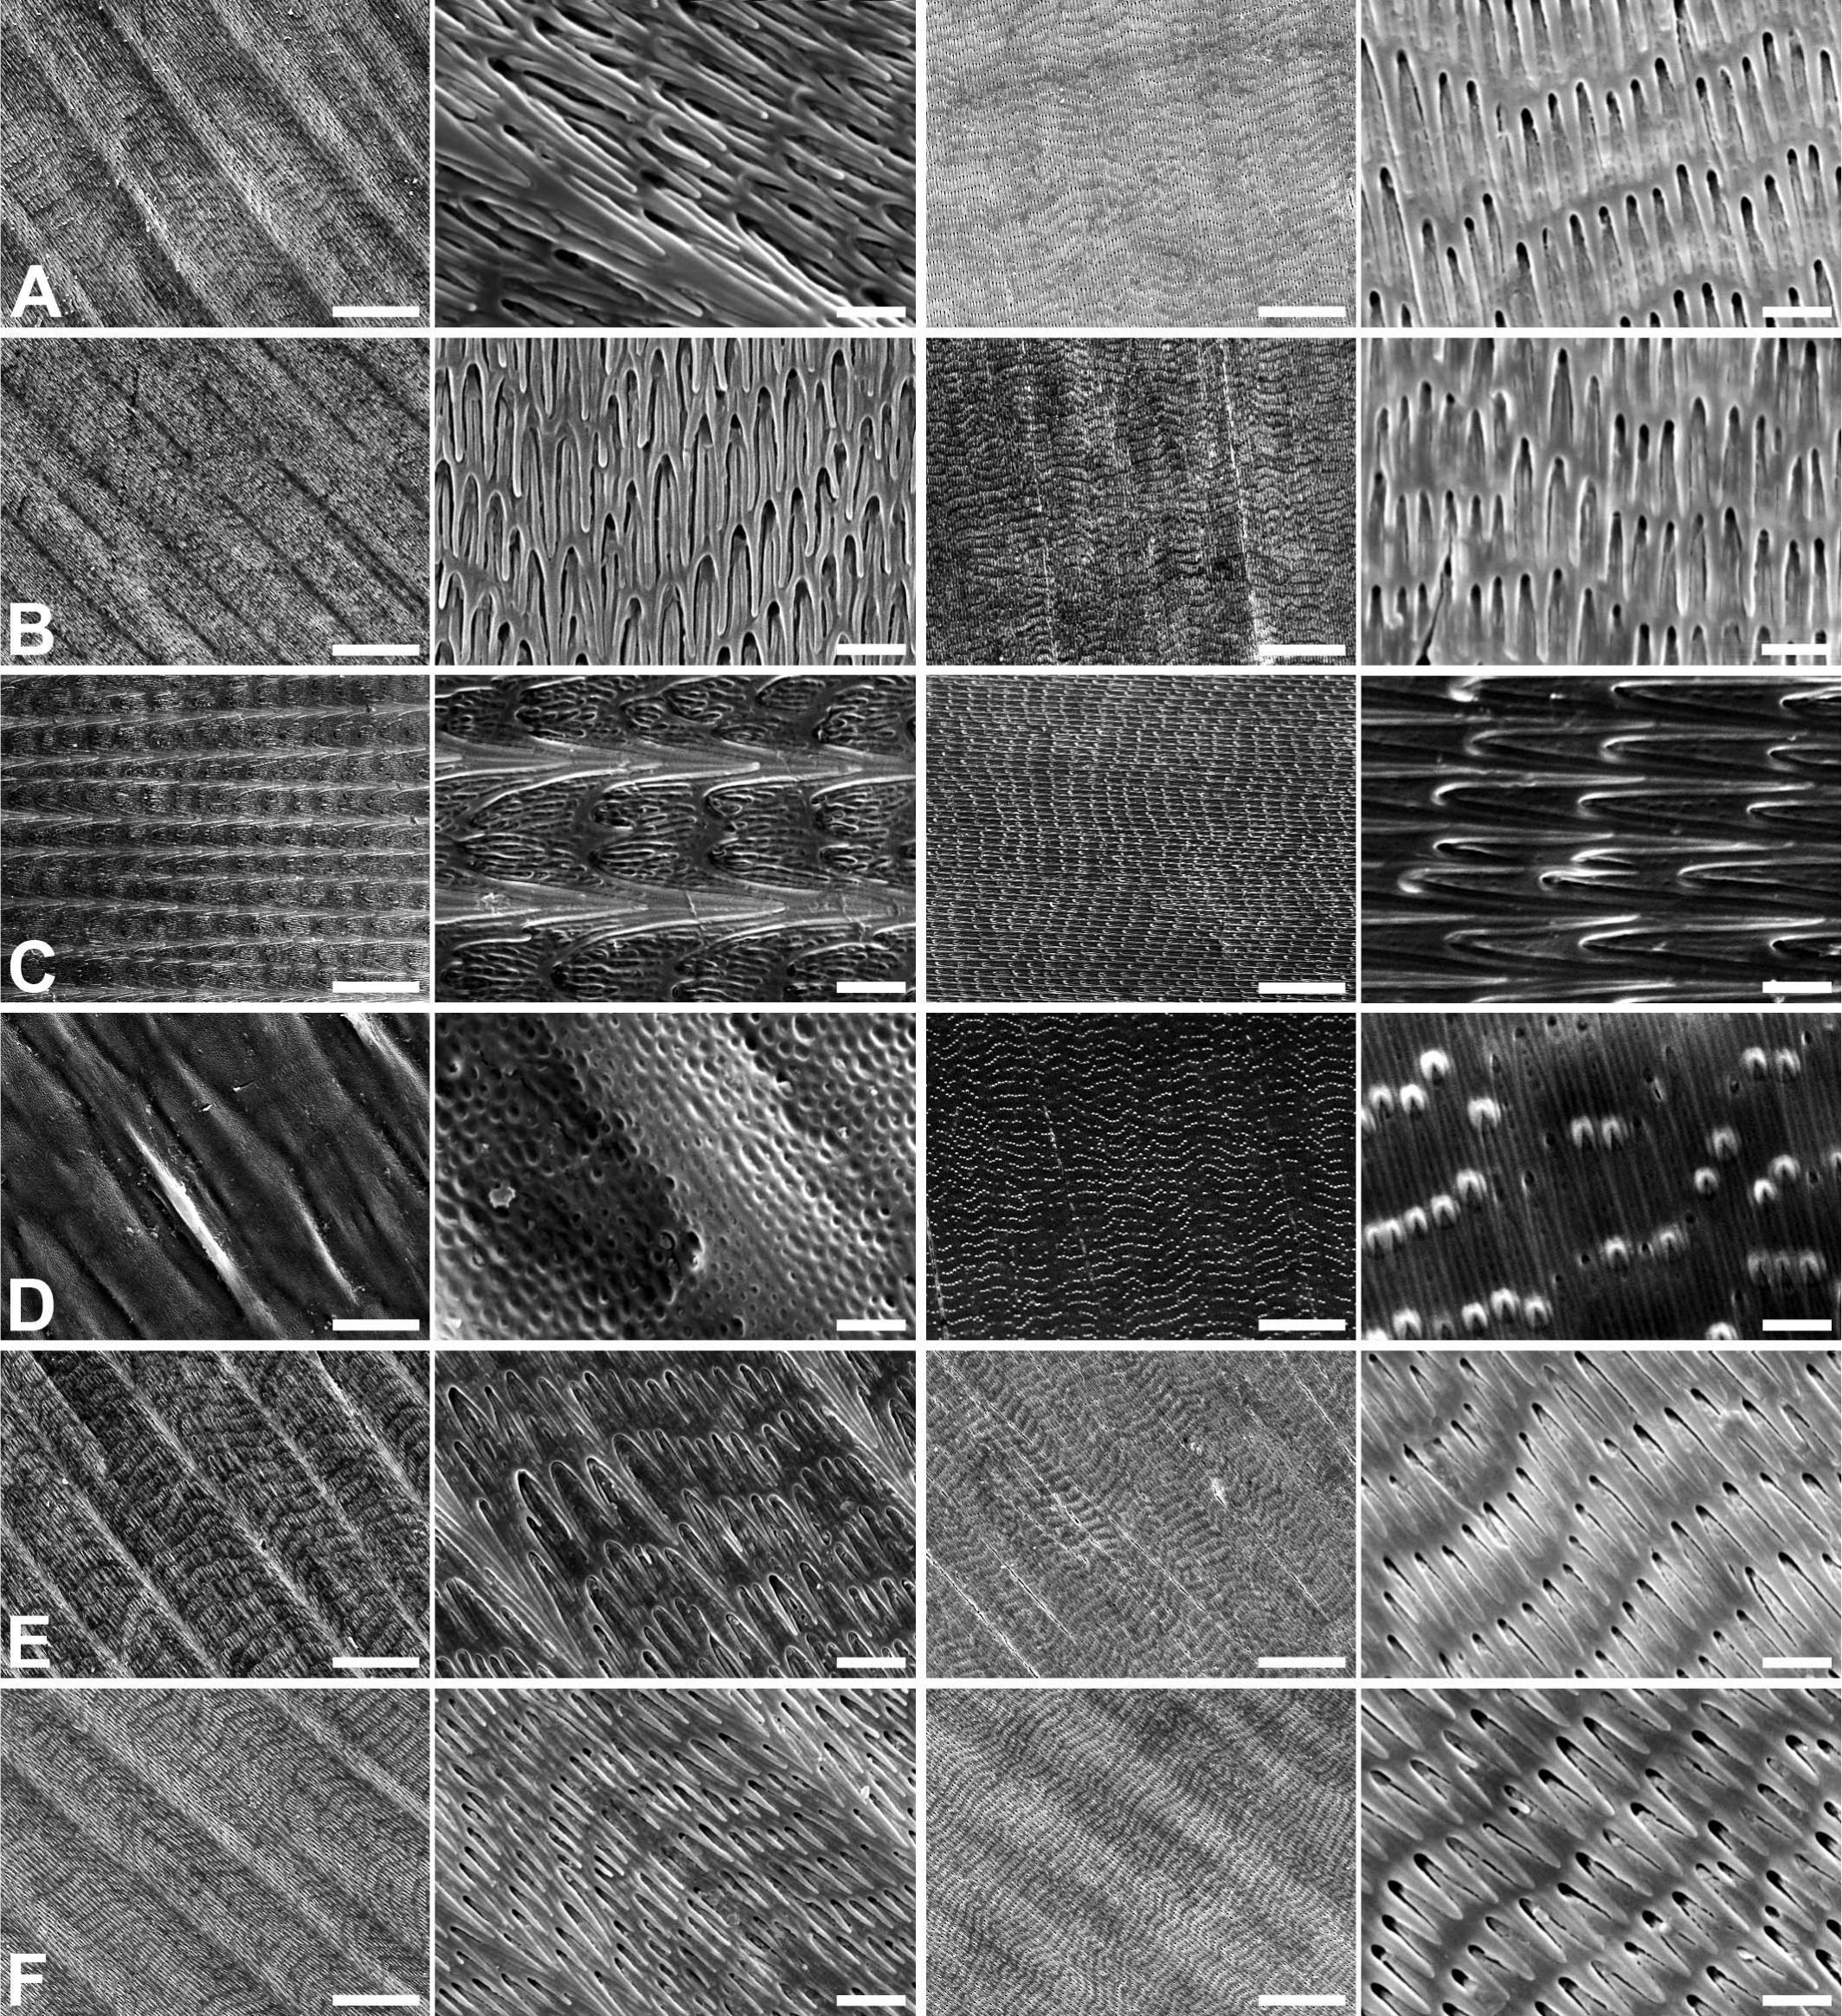 Species Identification Of Shed Snake Skins By Scanning Electron Microscopy With Verification Of Intraspecific Variations And Phylogenetic Comparative Analyses Of Microdermatoglyphics